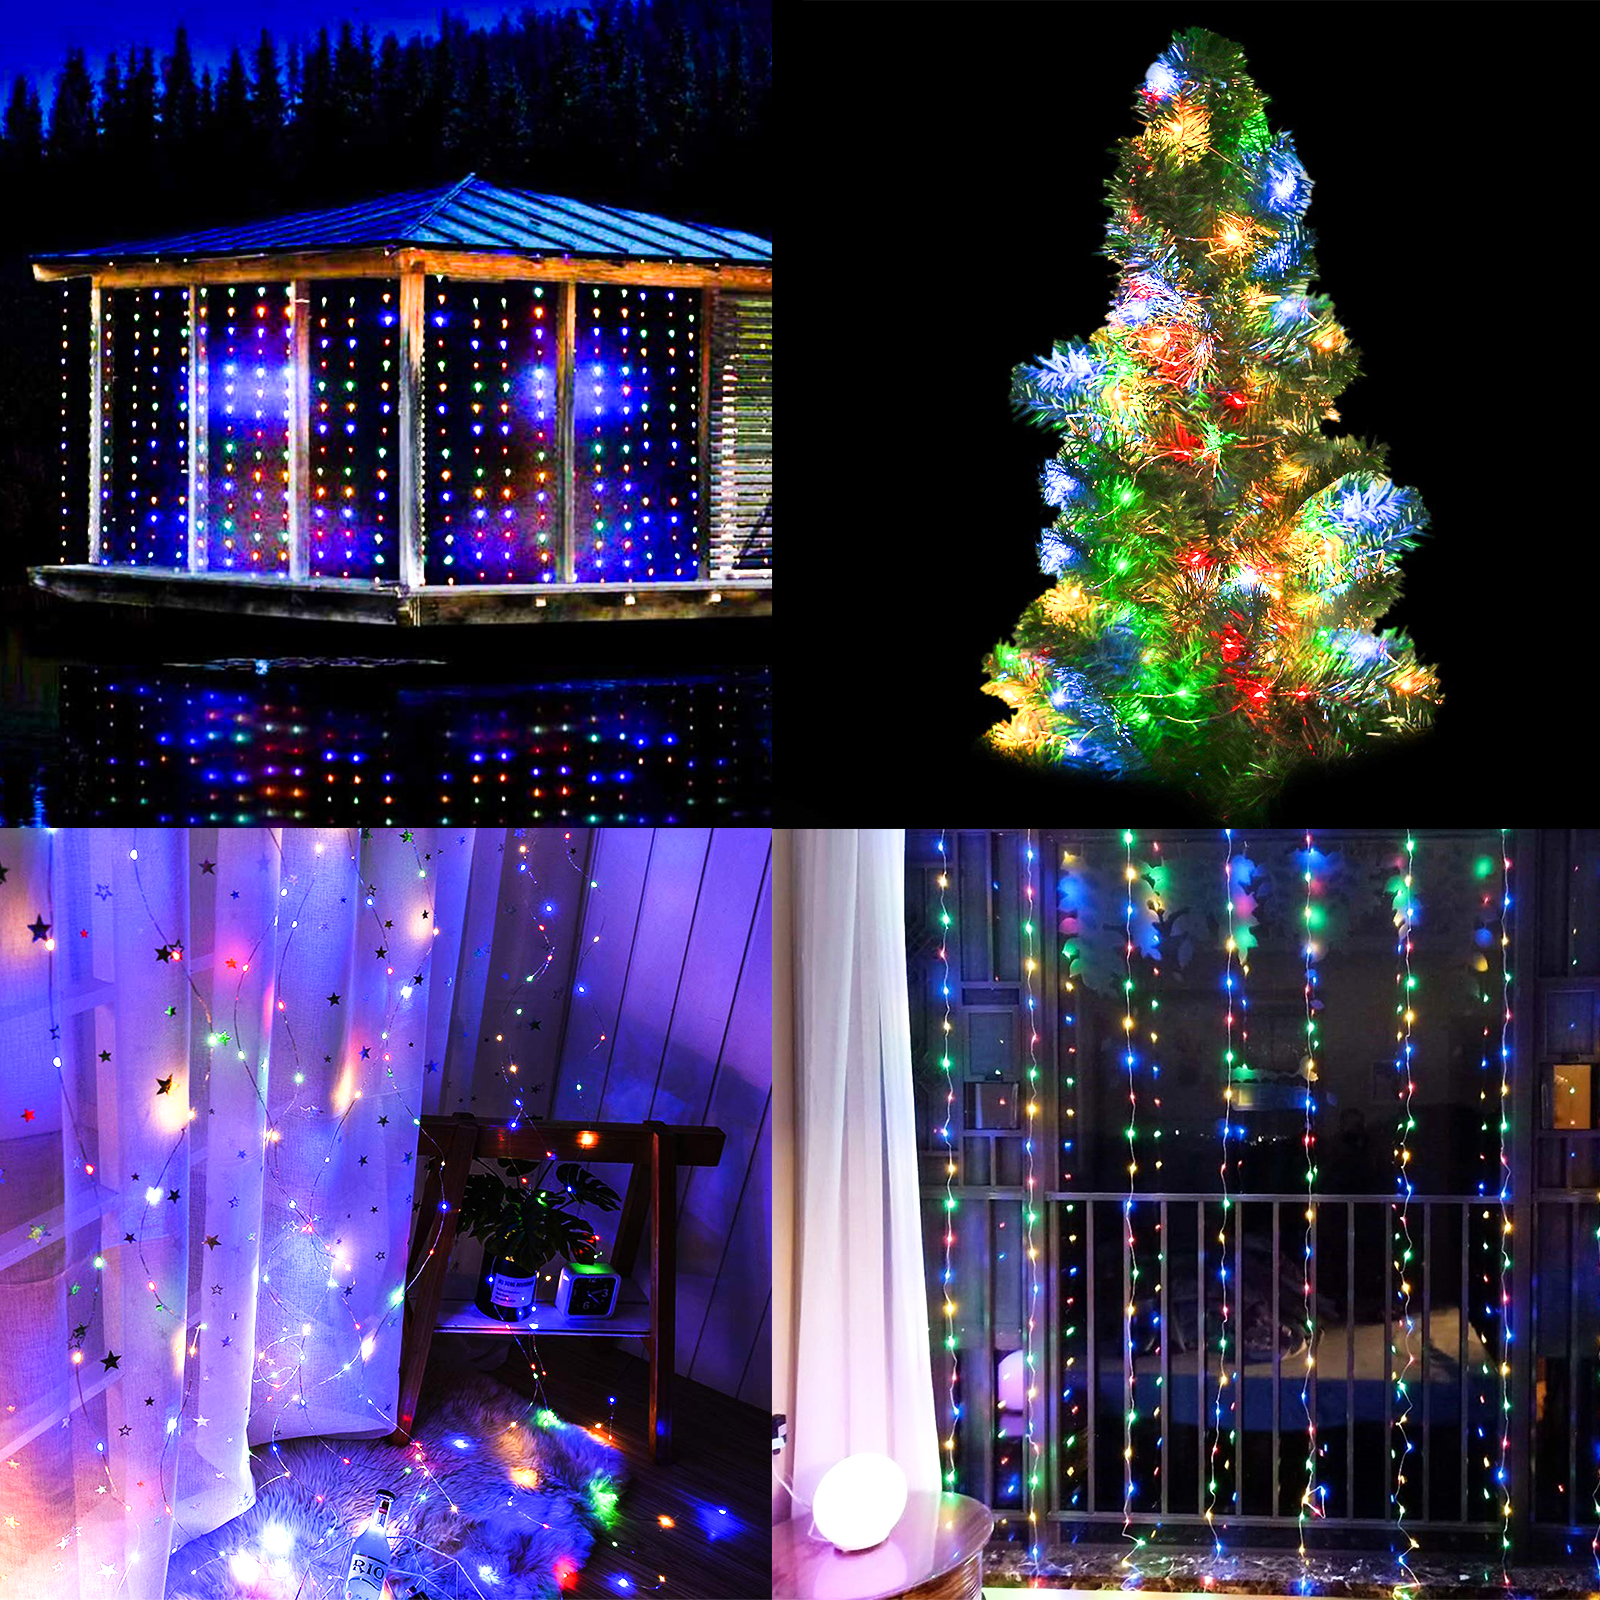 Fiee 300 LED Window Curtain String Light with Remote Control Timer for Christmas Wedding Party Bedroom Garden Wall Outdoor IndoorDecoration Warm White